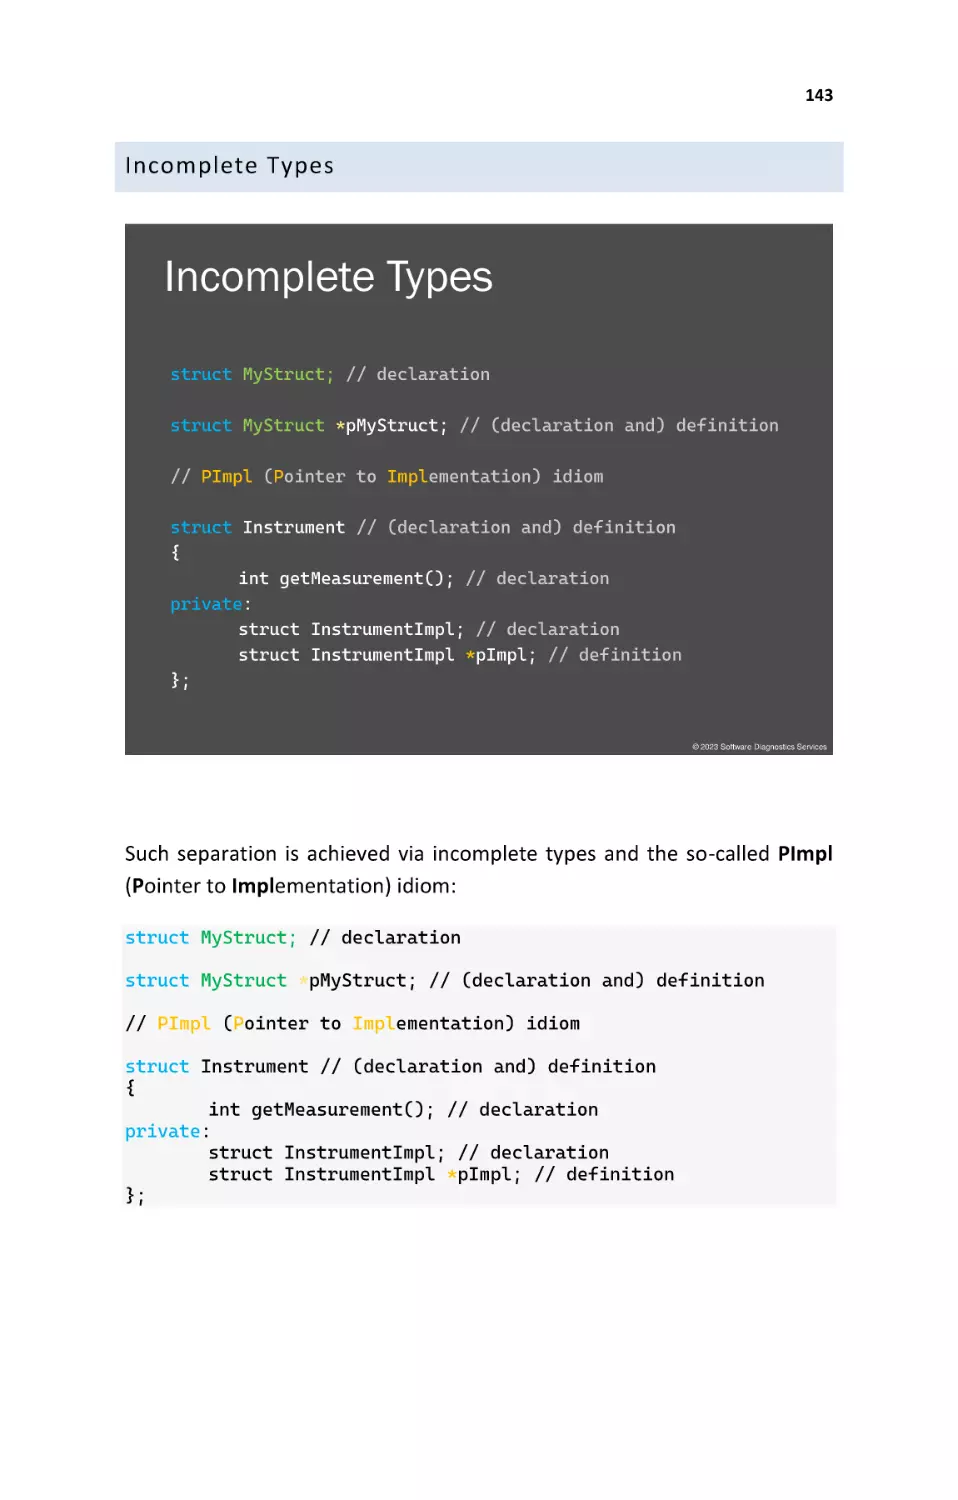 Incomplete Types